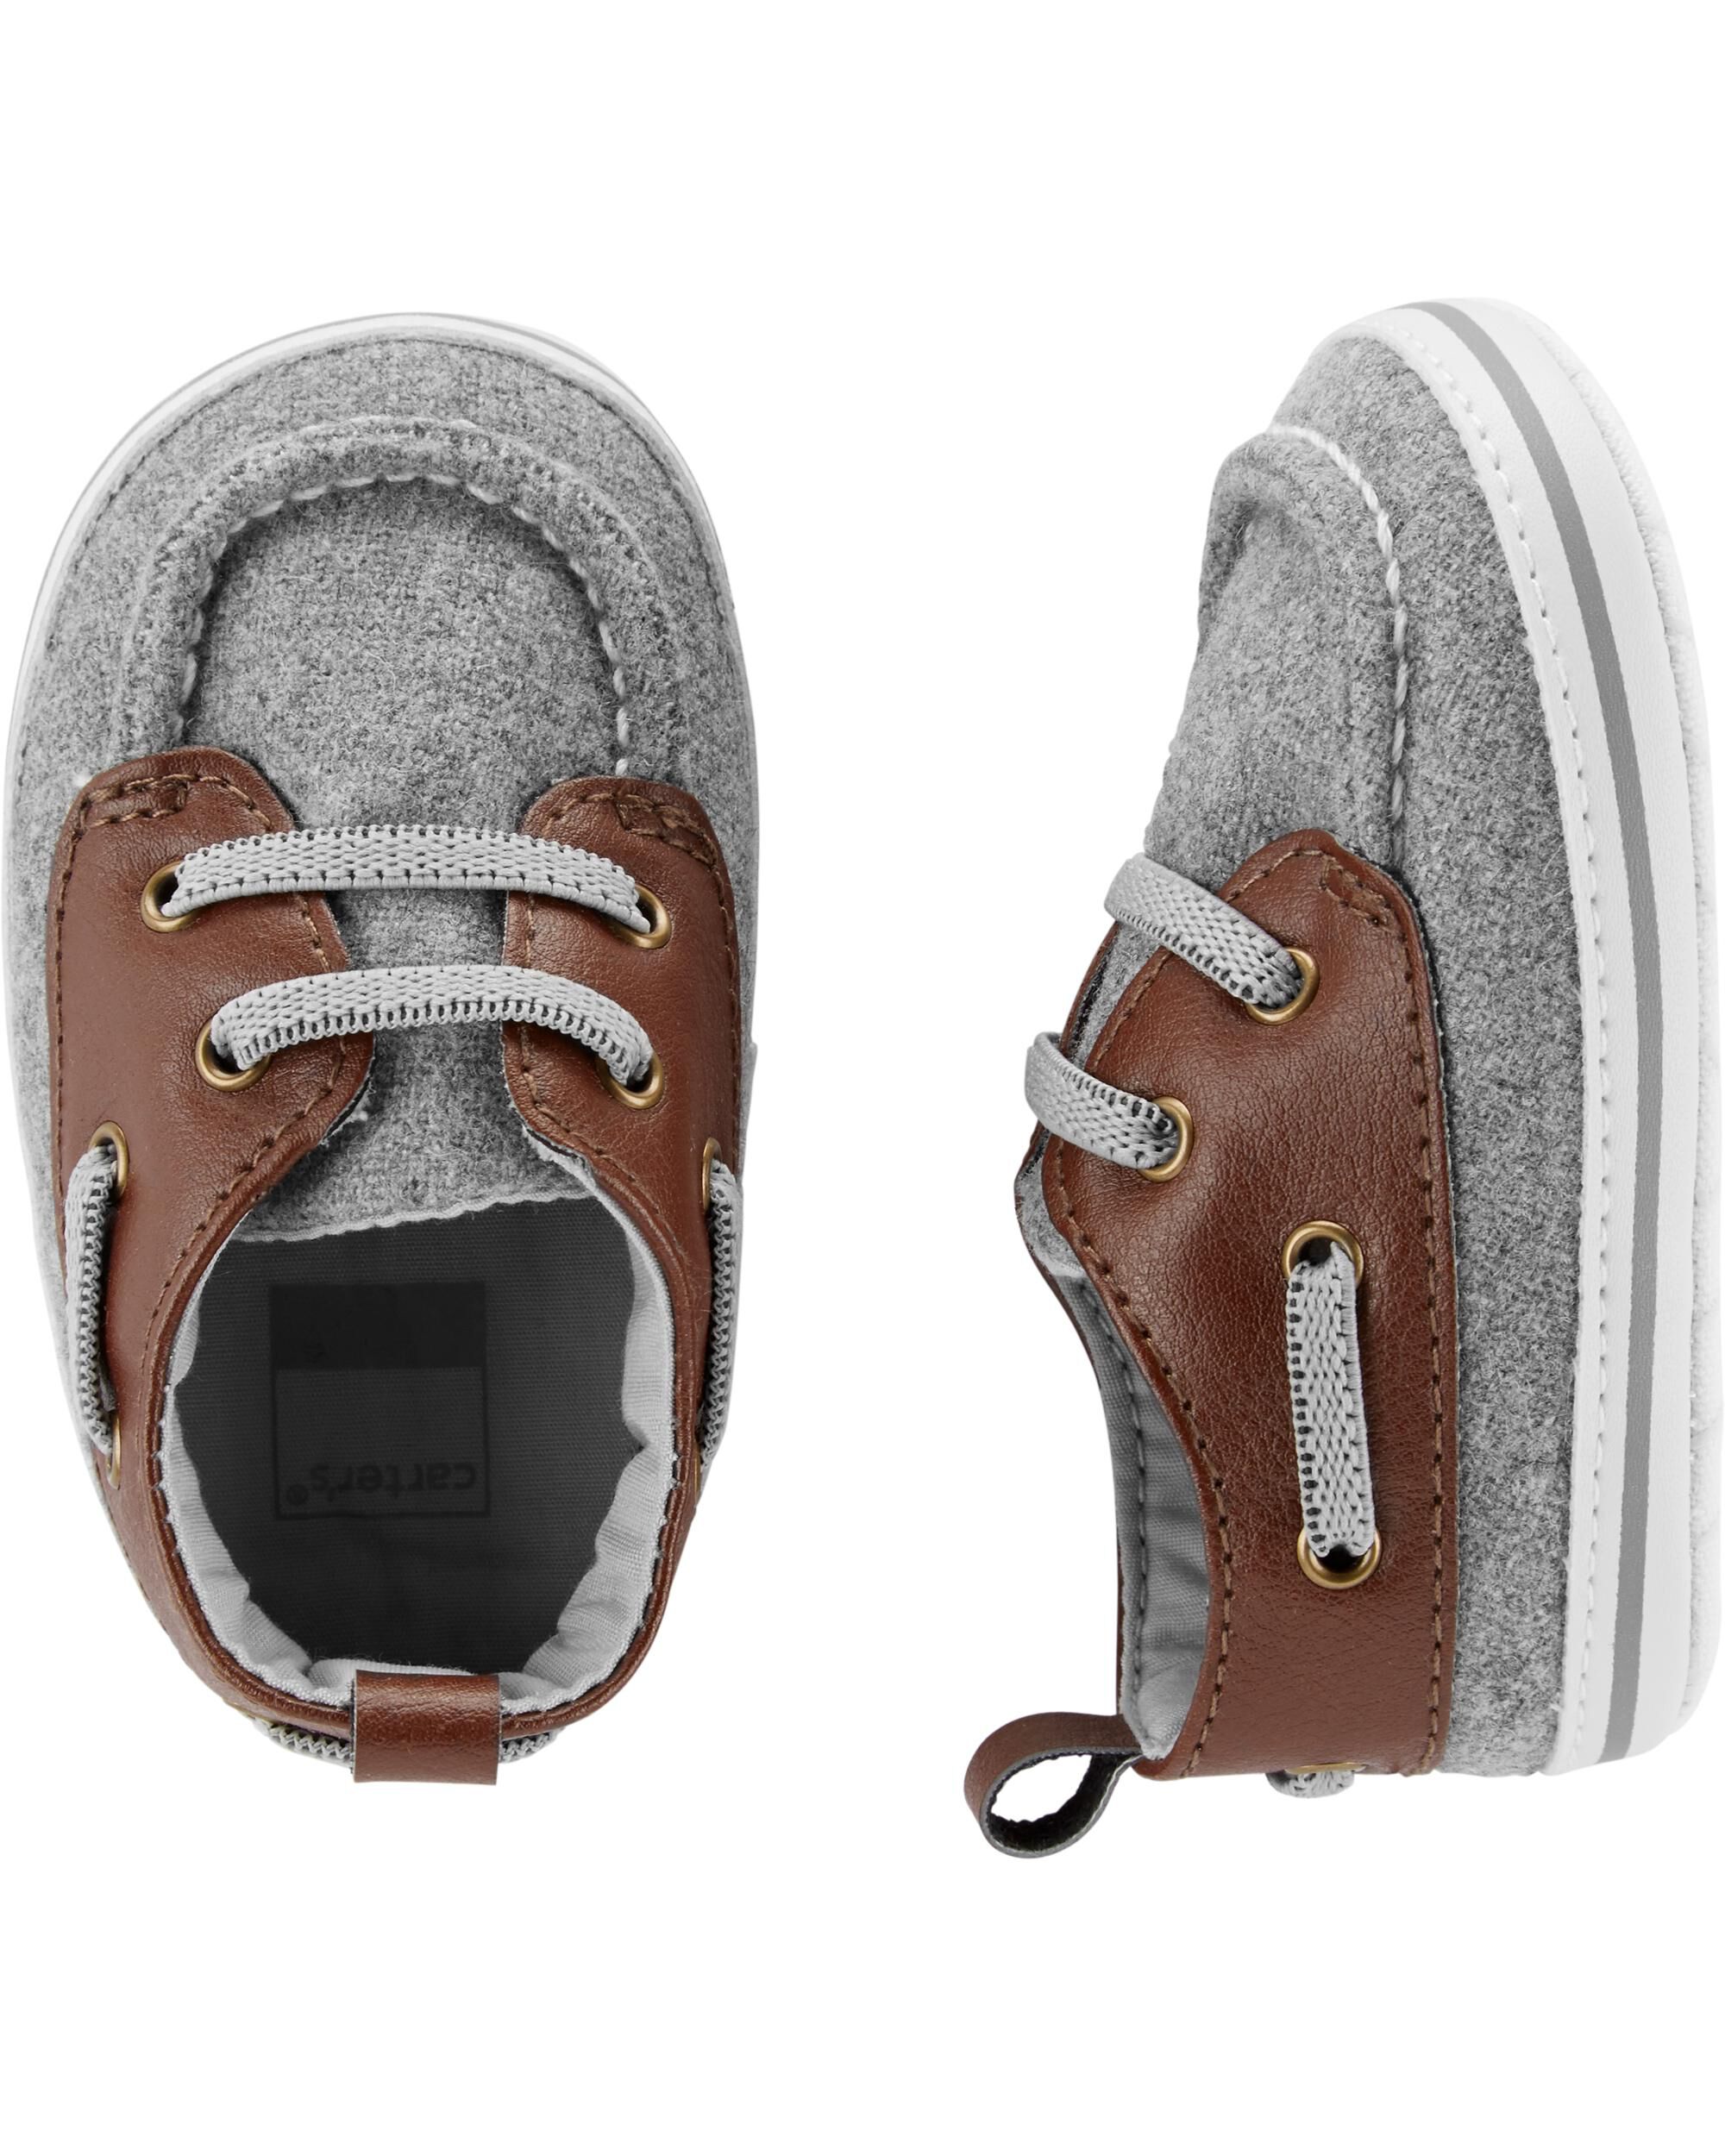 Carter's Boat Baby Shoes | carters.com